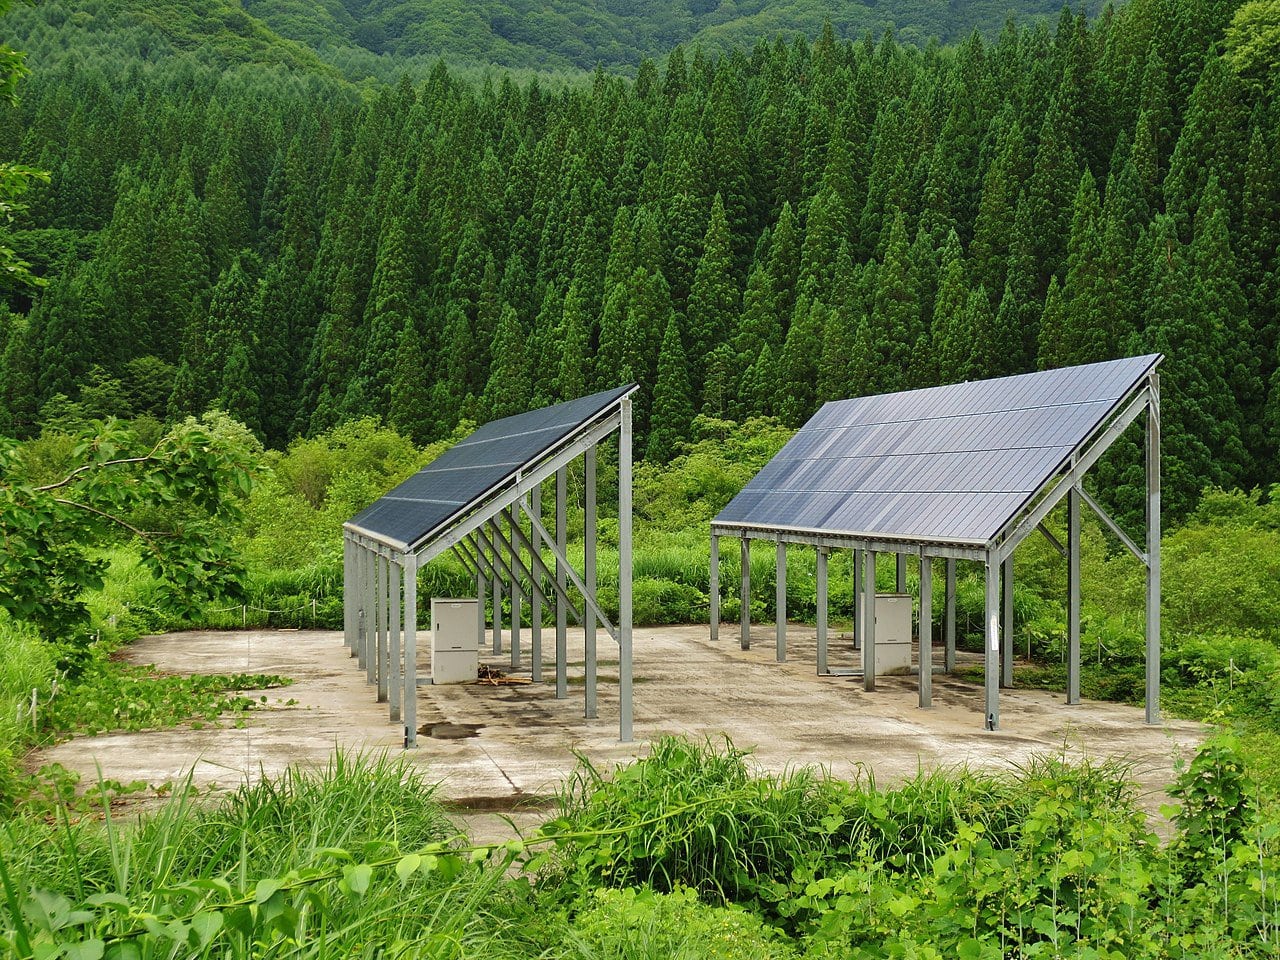 A small solar power station. Photo by Qurren Wikimedia Commons